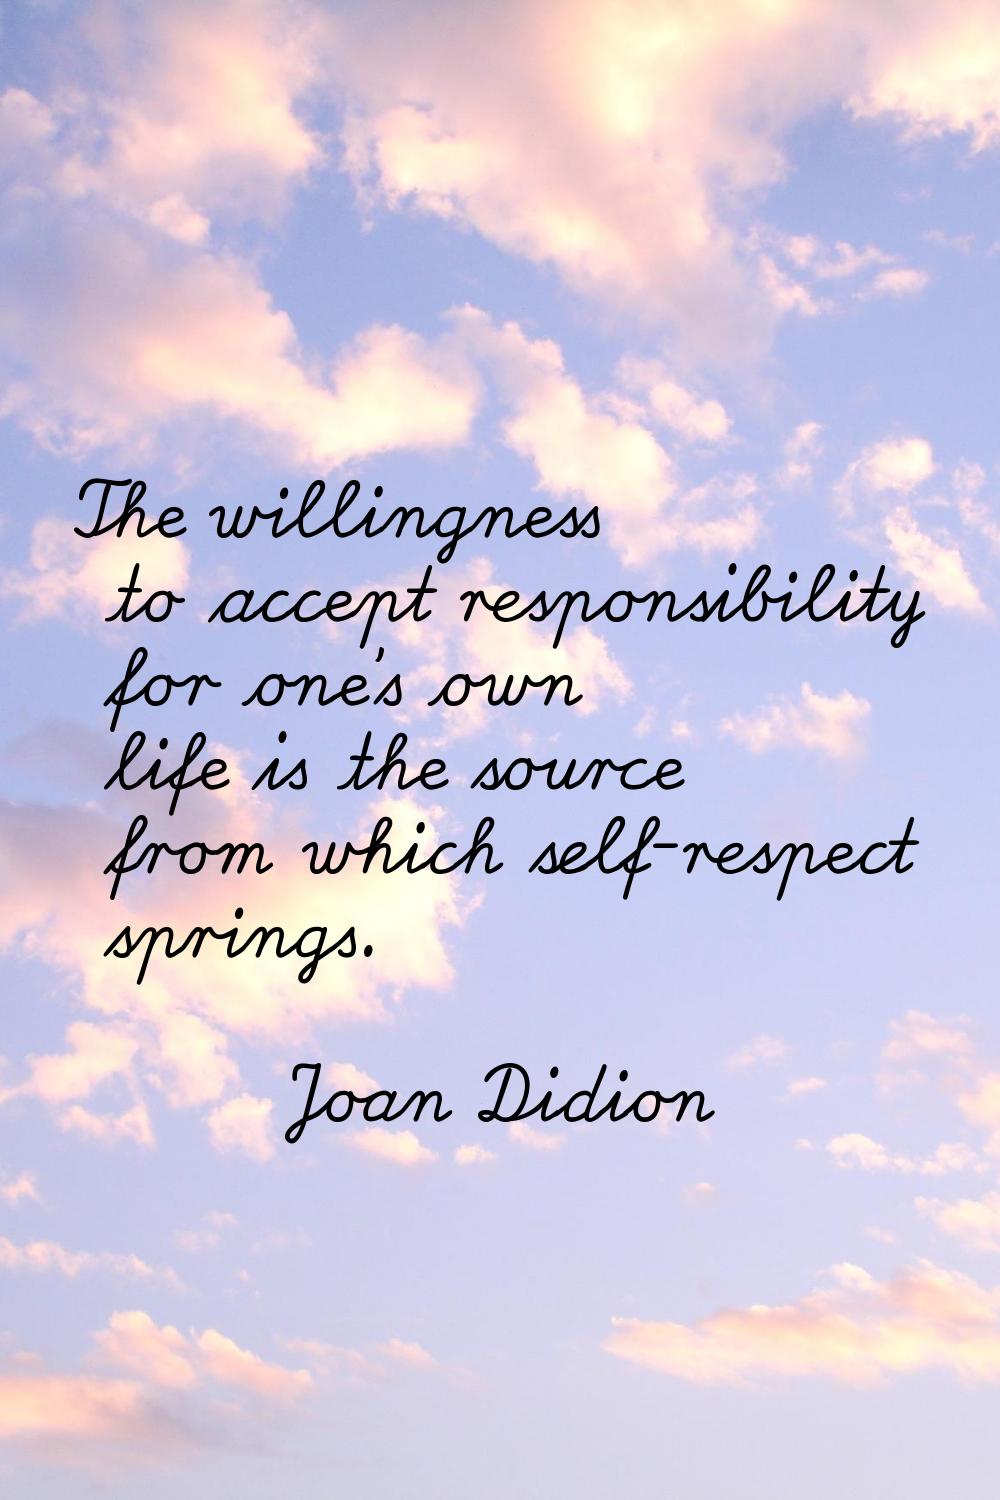 The willingness to accept responsibility for one's own life is the source from which self-respect s